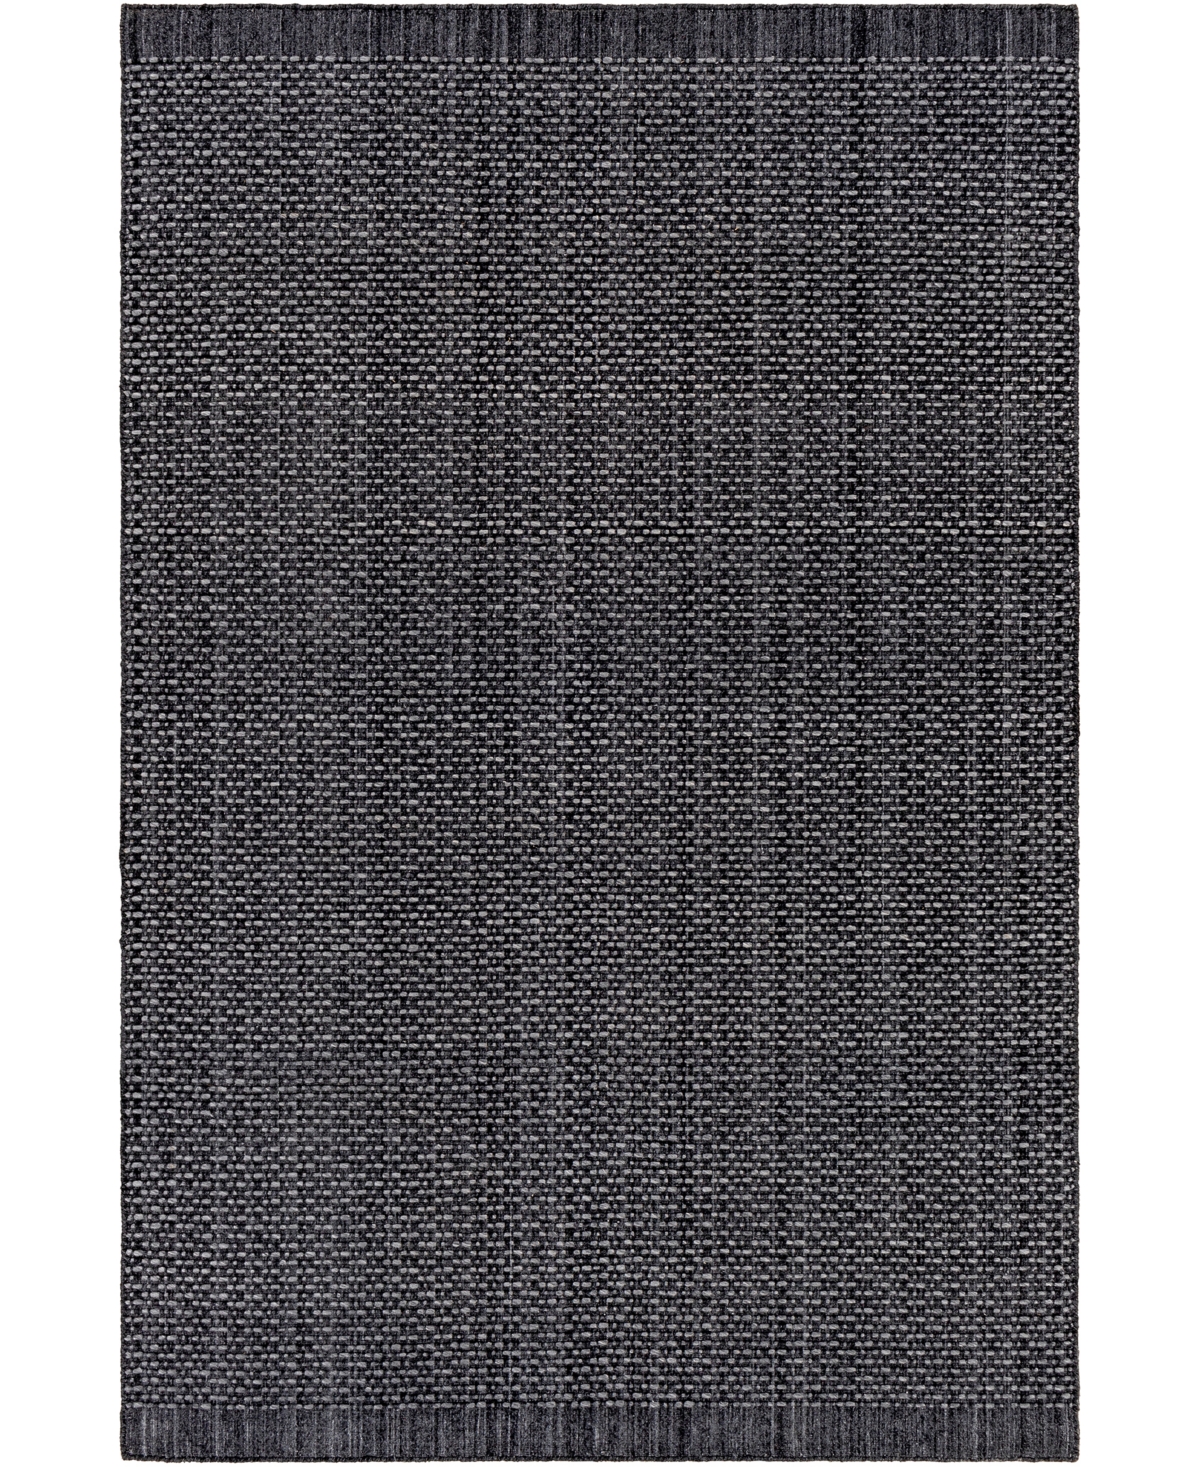 Surya Sycamore Syc-2302 9in x 12' Outdoor Area Rug - Charcoal